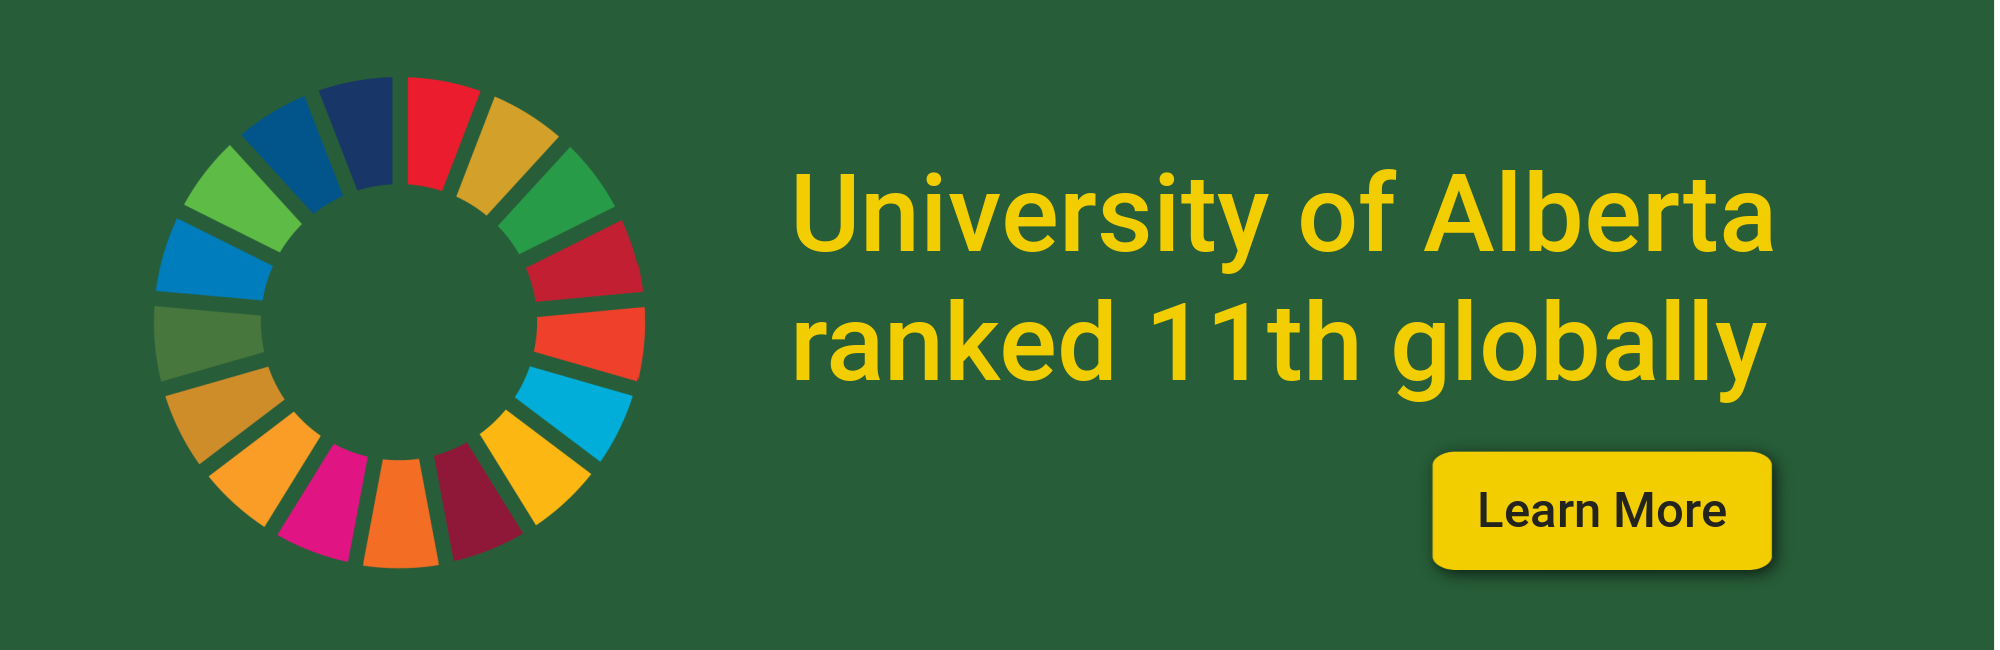 University of Alberta ranked 11th globally. Learn more